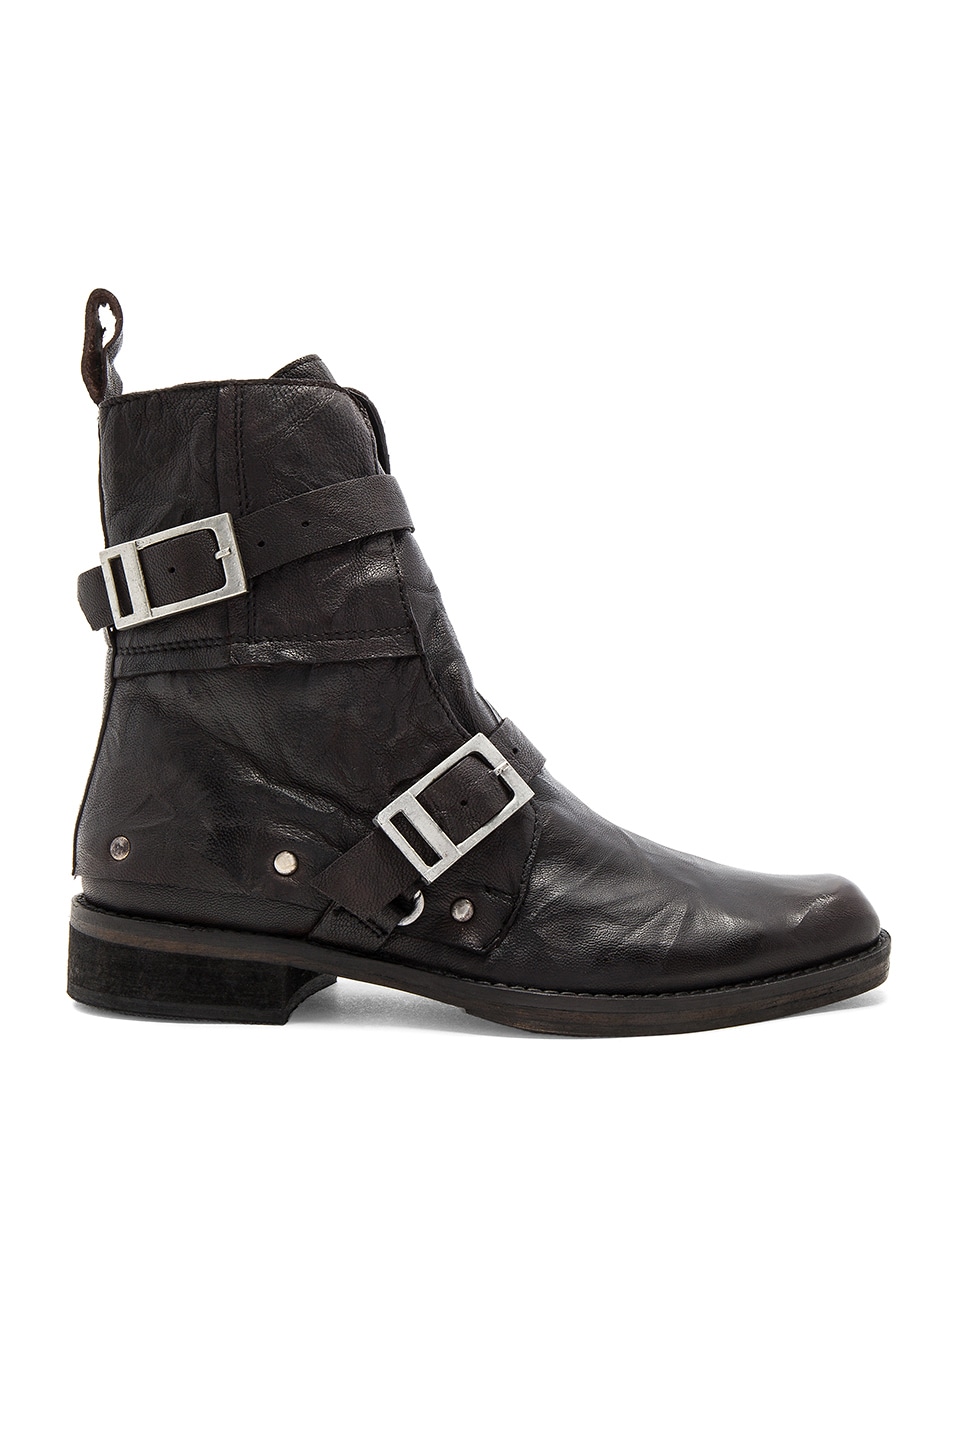 Free People Outsiders Moto Boot in Black | REVOLVE